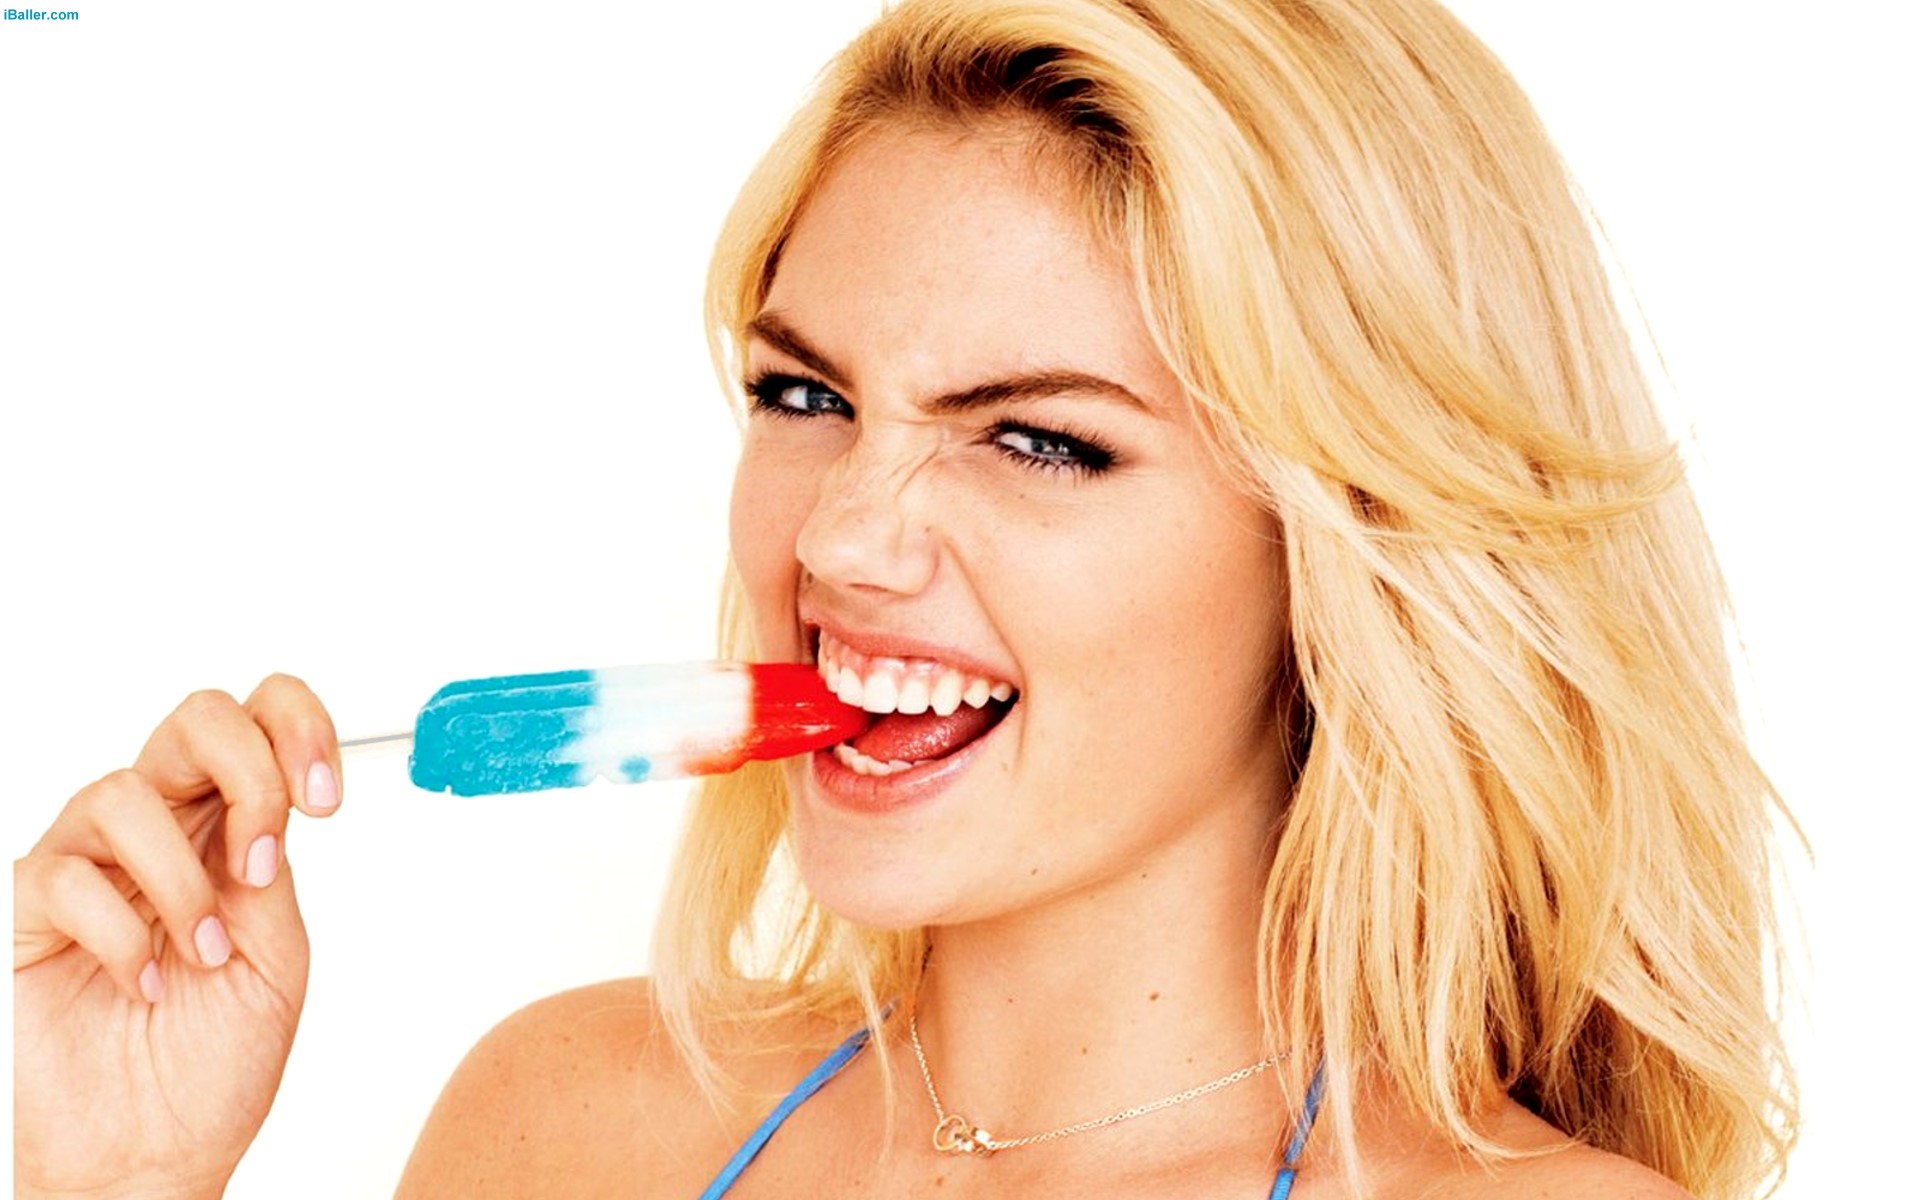 We Provide You To Kate Upton New Wallpaper And